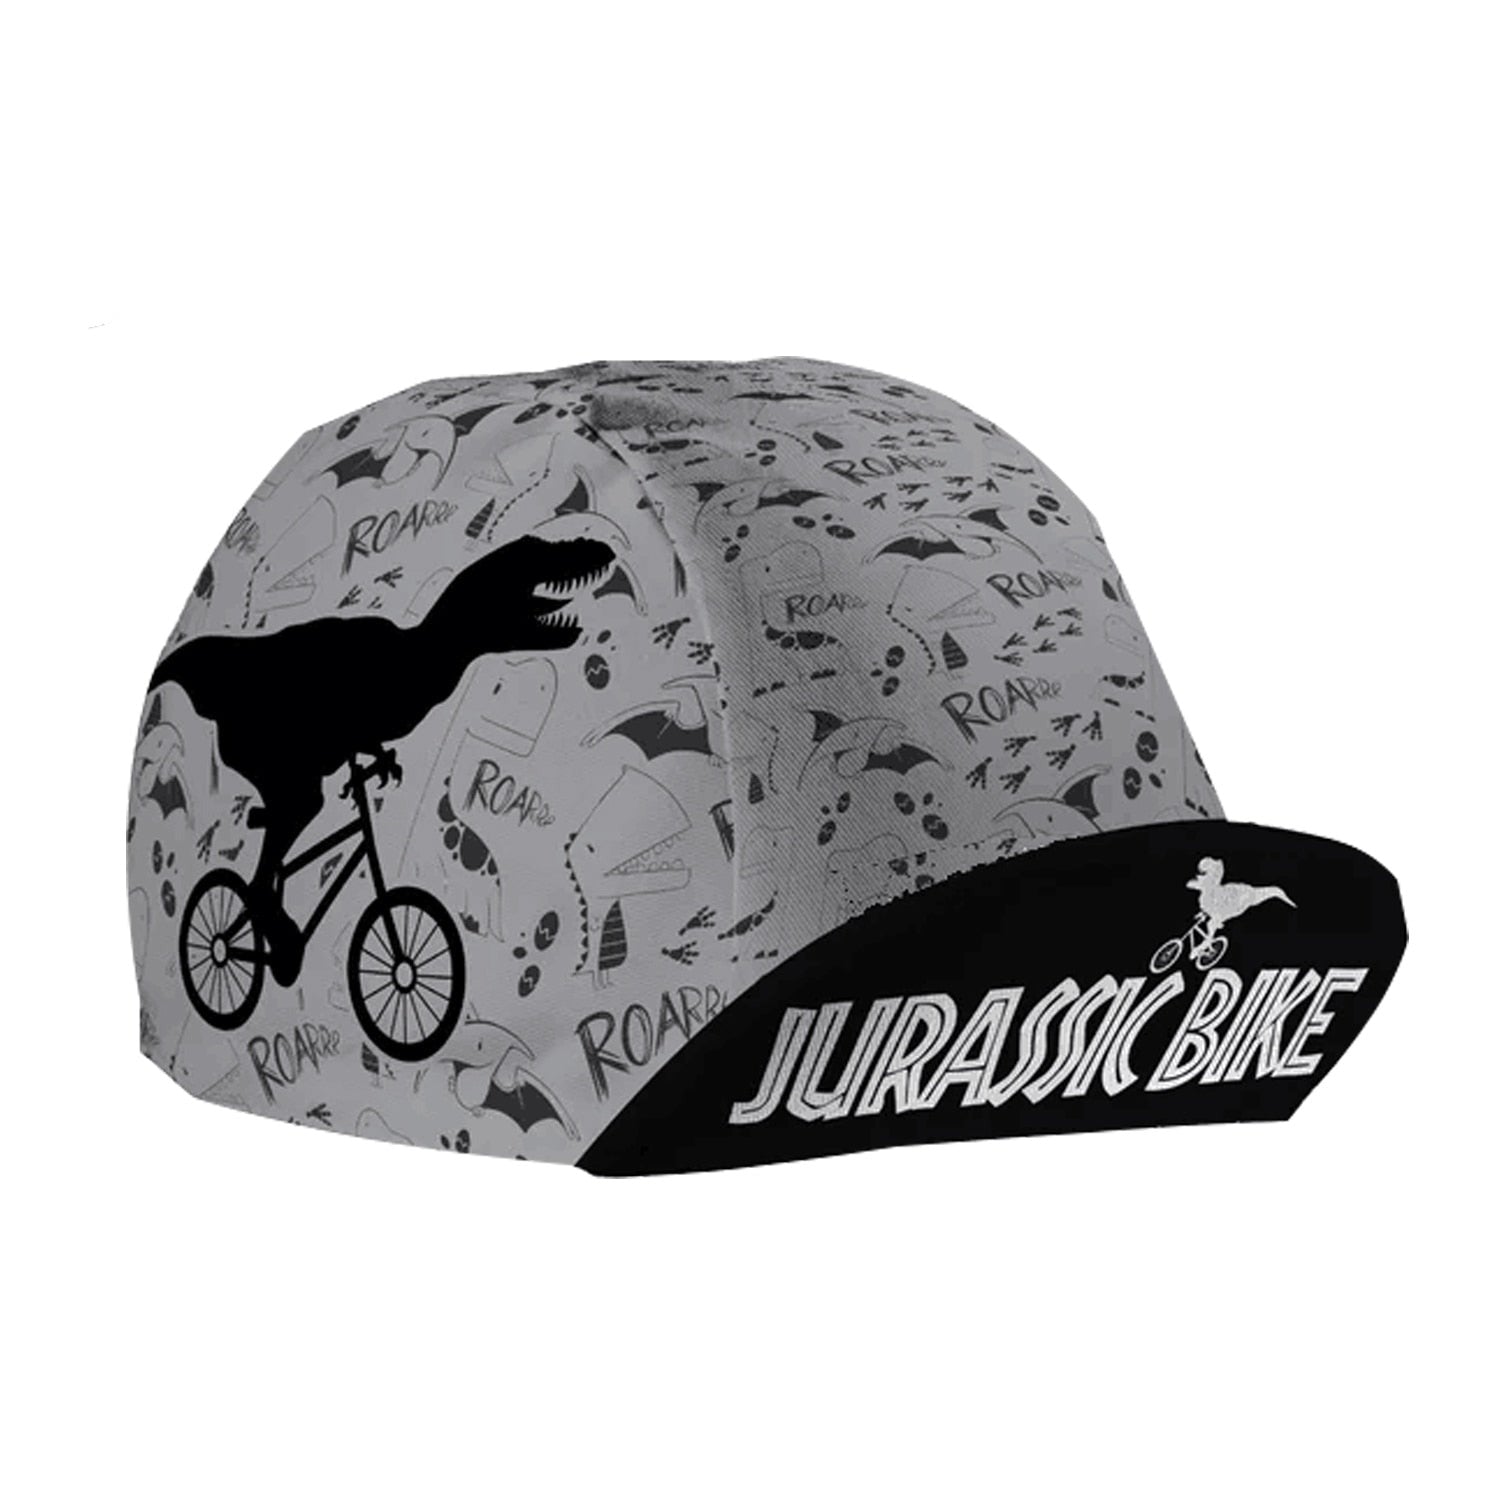 Classic Jurassic Dinosaur Grey Polyester Cycling Caps Motorcycle Road Bike Sports Balaclava Quick Dry Sun Protection Cool Hat